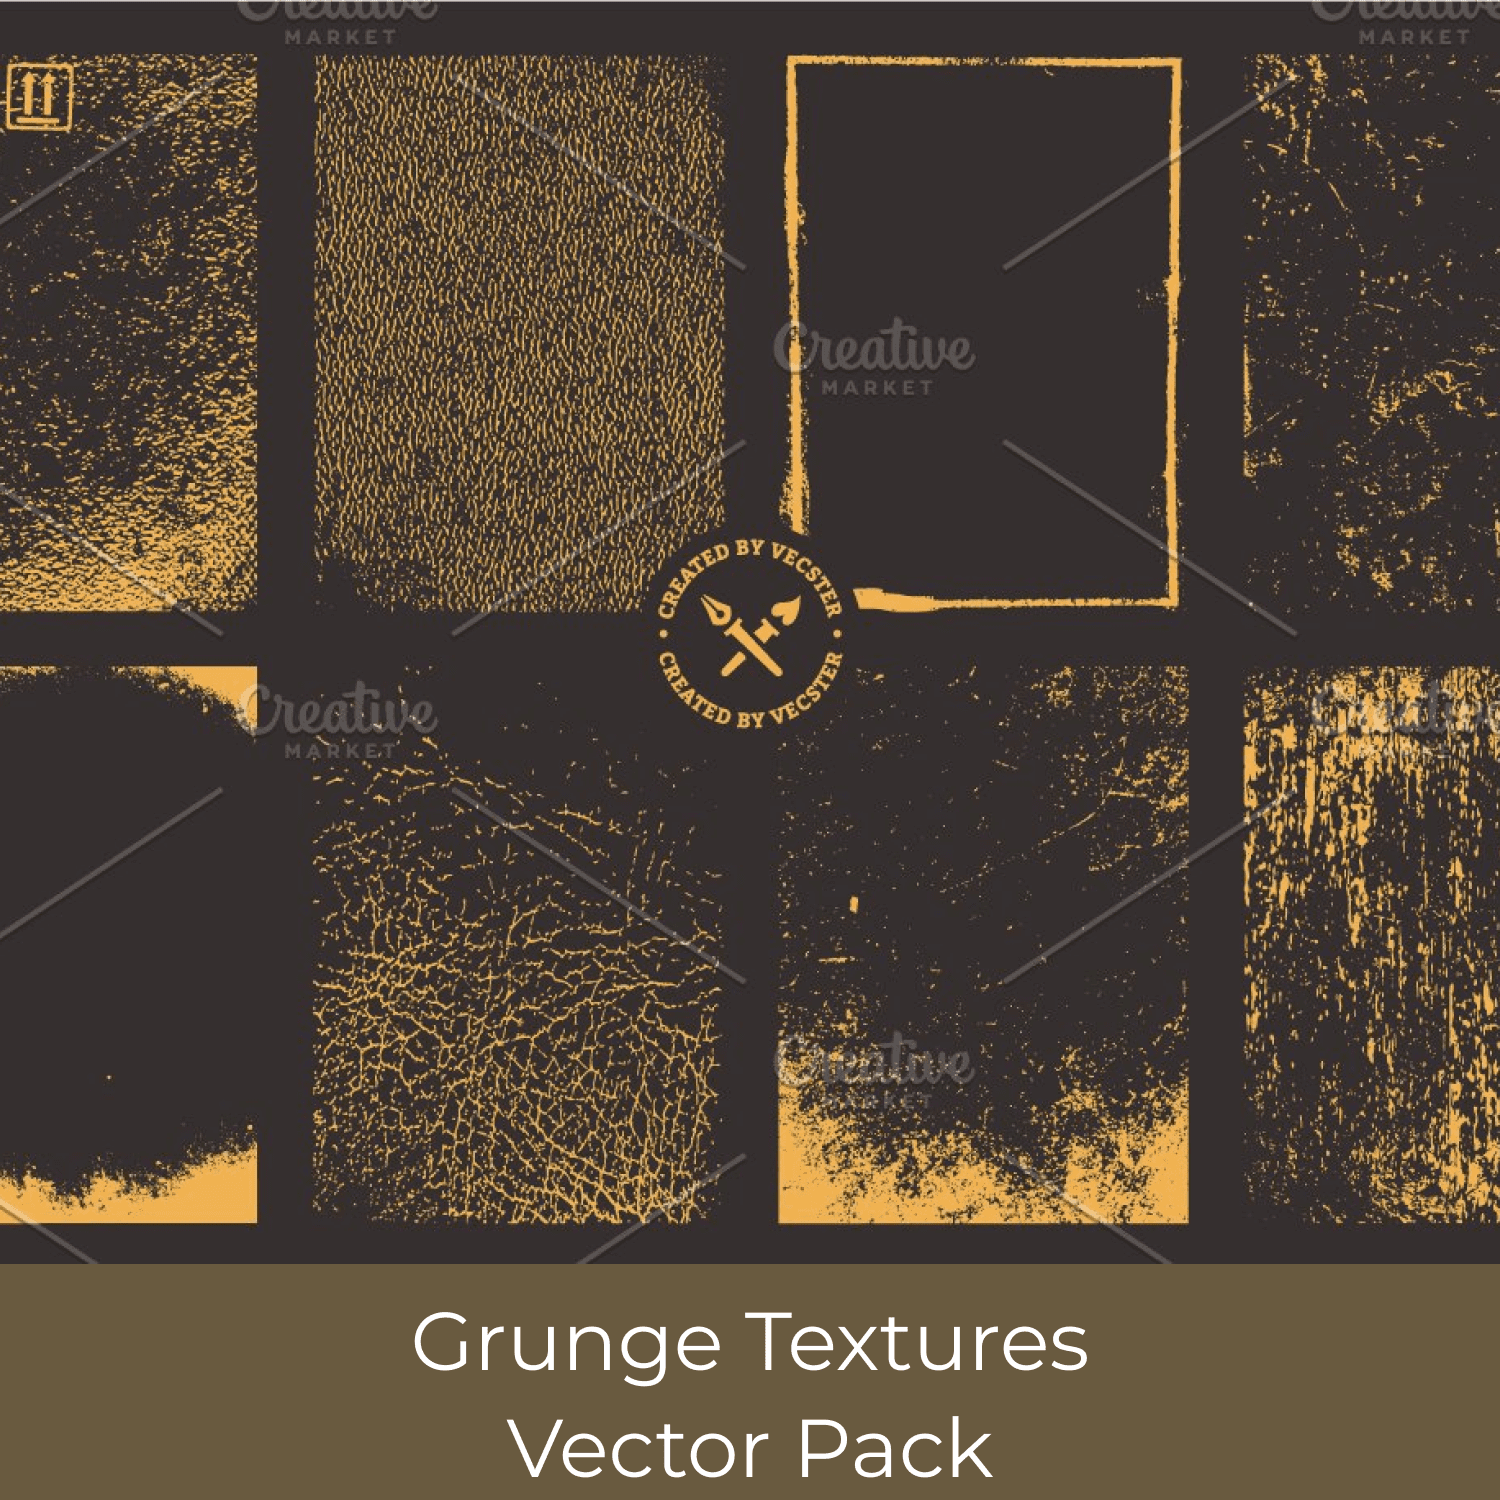 Grunge Textures Vector Pack cover.